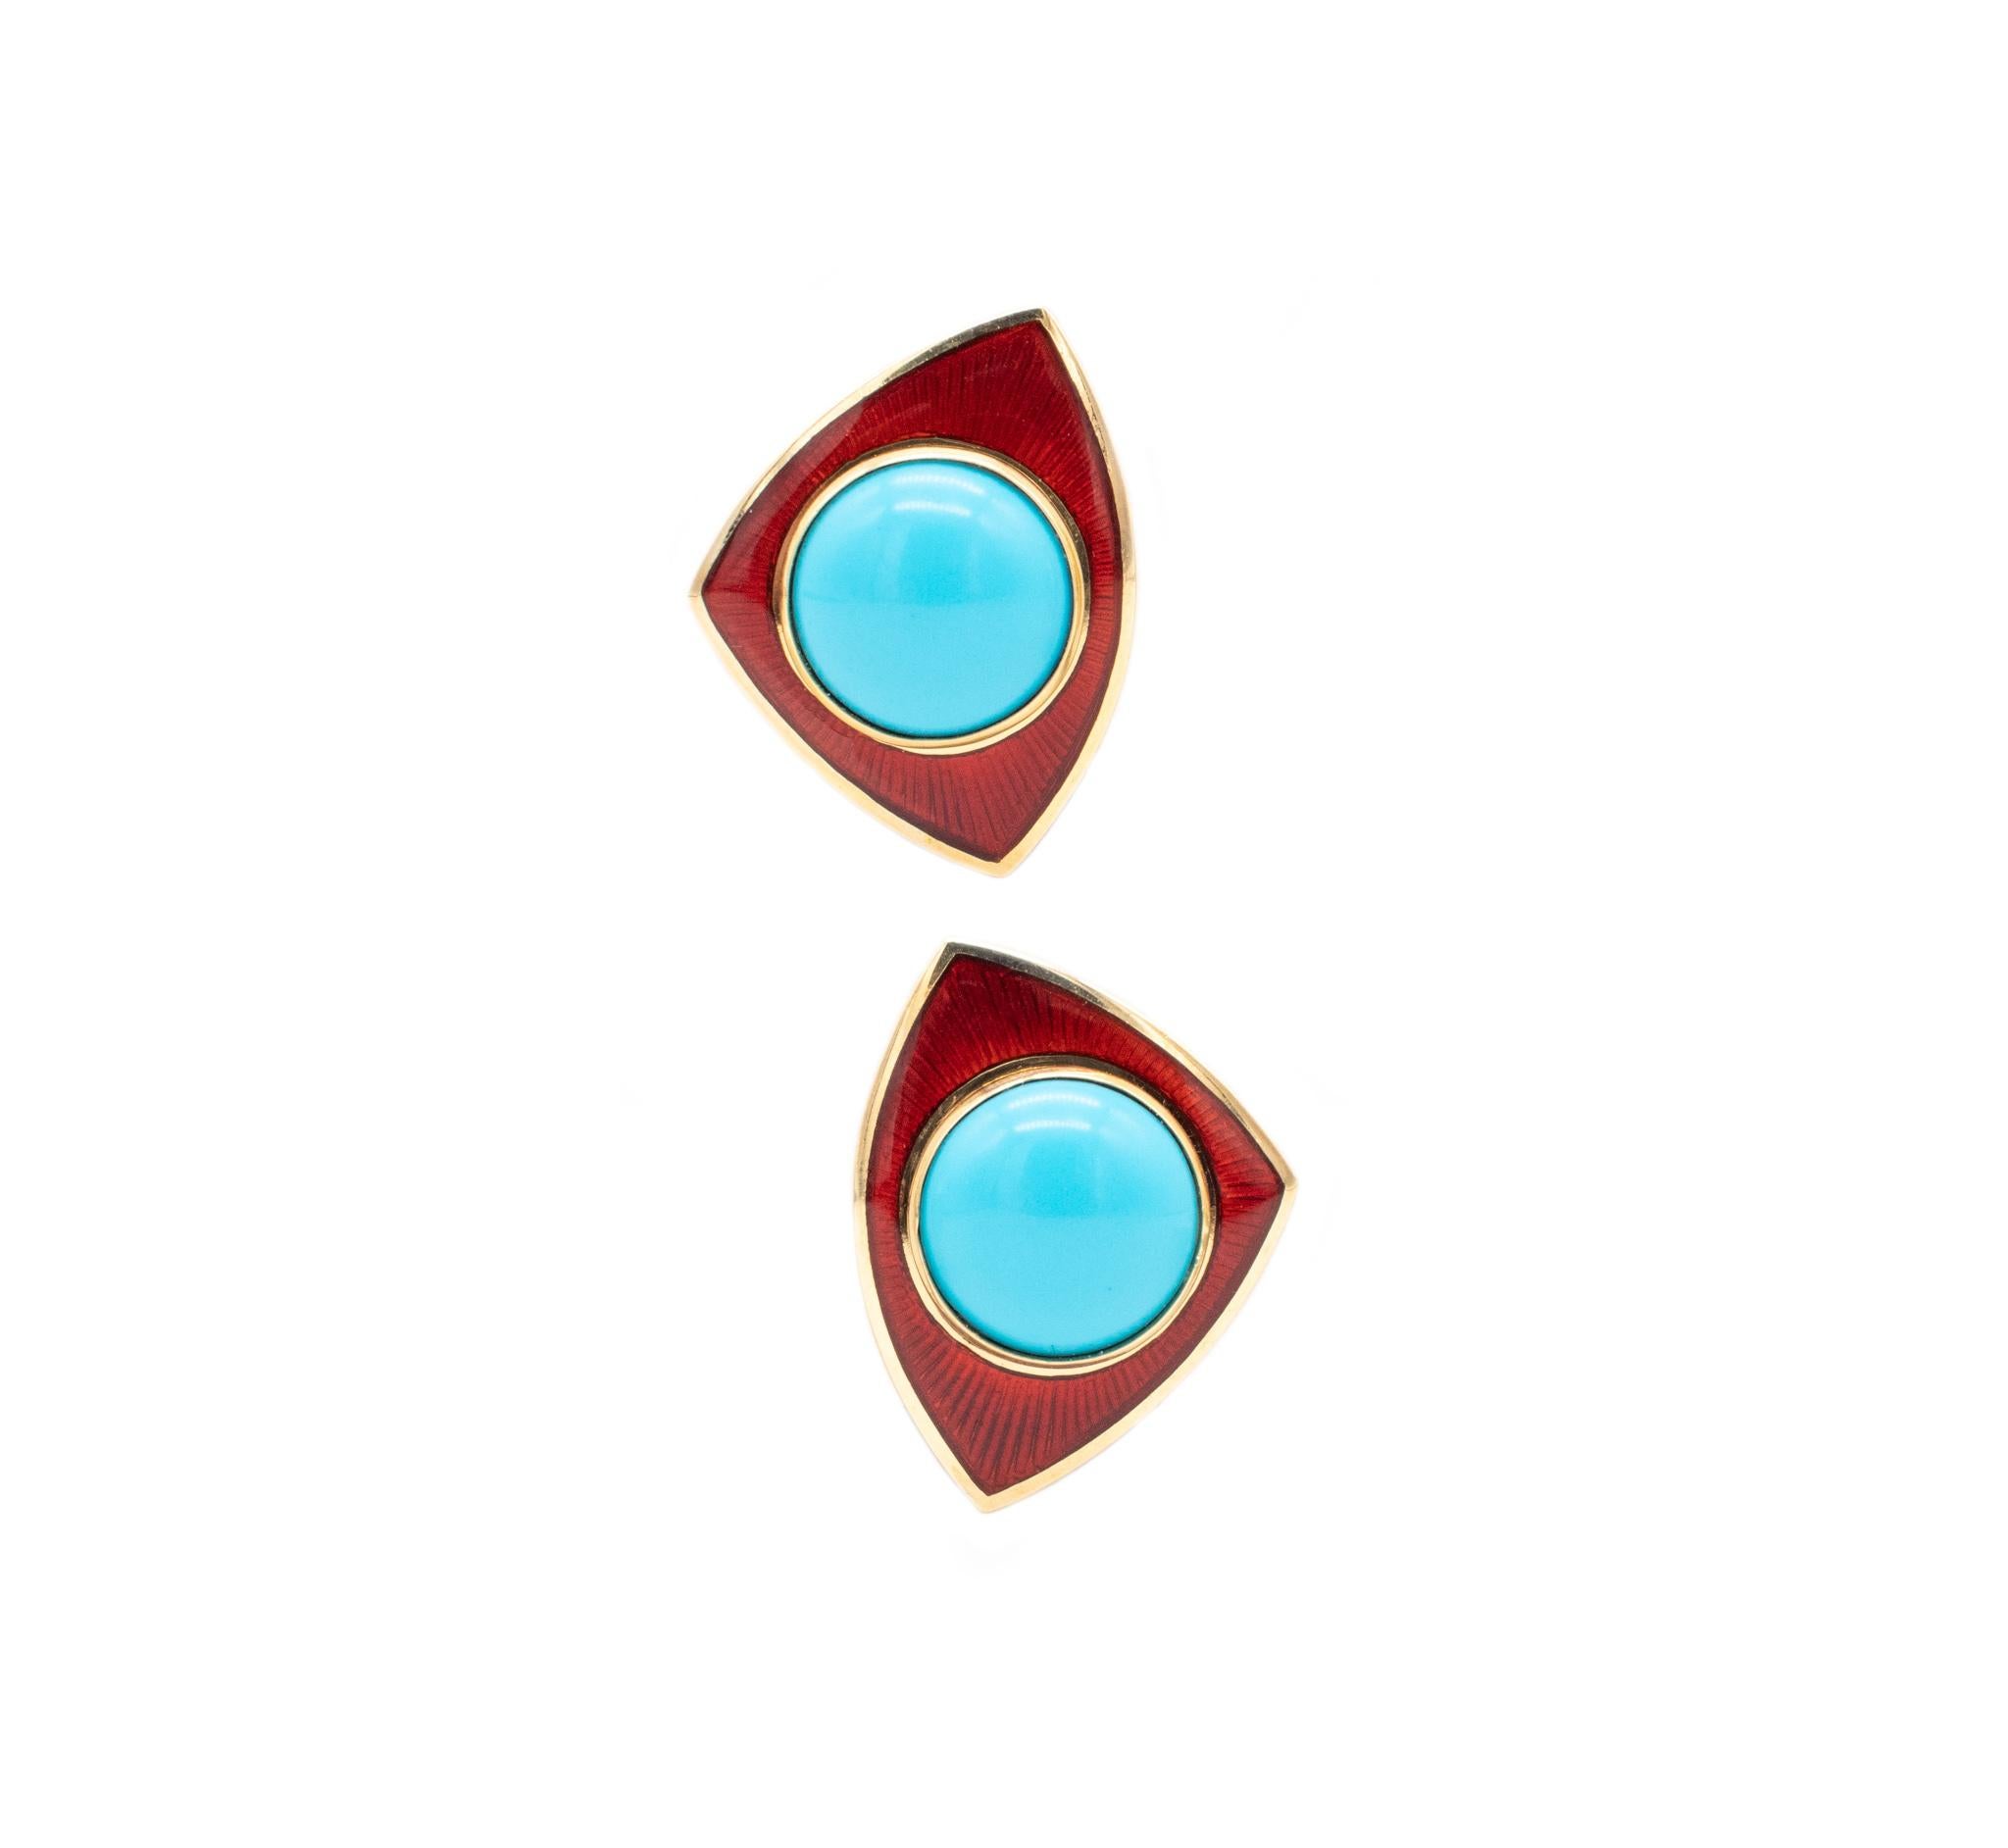 Pair of gem set clips-earrings designed by Leo De Vroomen.

A beautiful and colorful one-of-a-kind geometric round pieces, created in London United Kingdom by jewelry house of Leo De Vroomen. This pair of clips-earrings was carefully crafted in